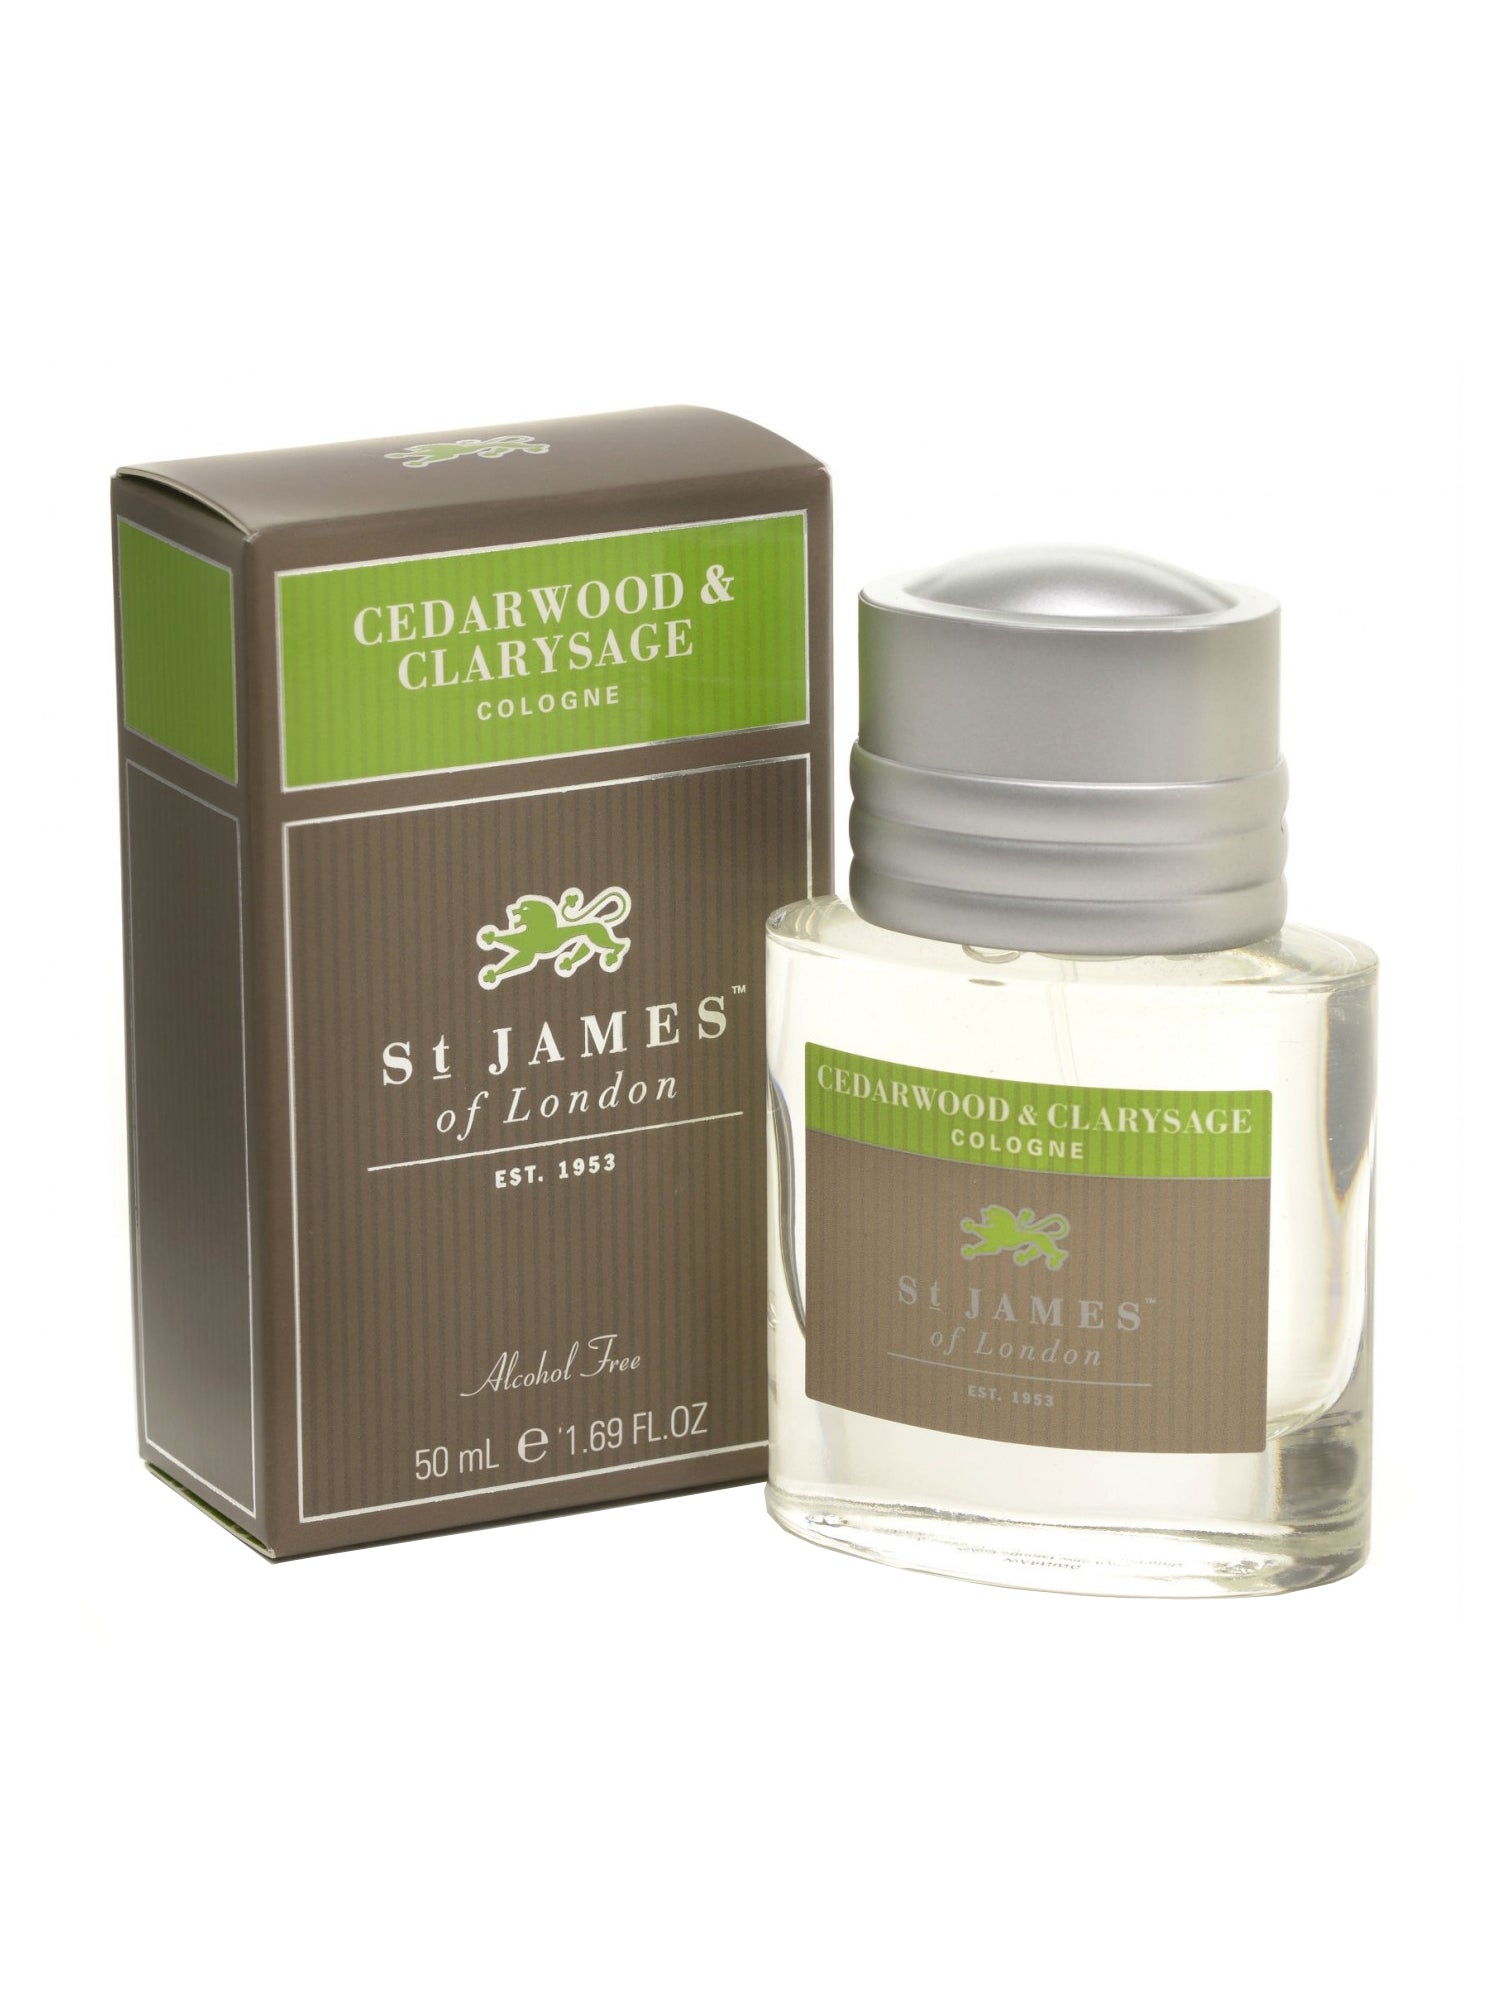 St James of London Cedarwood and Clarysage Cologne